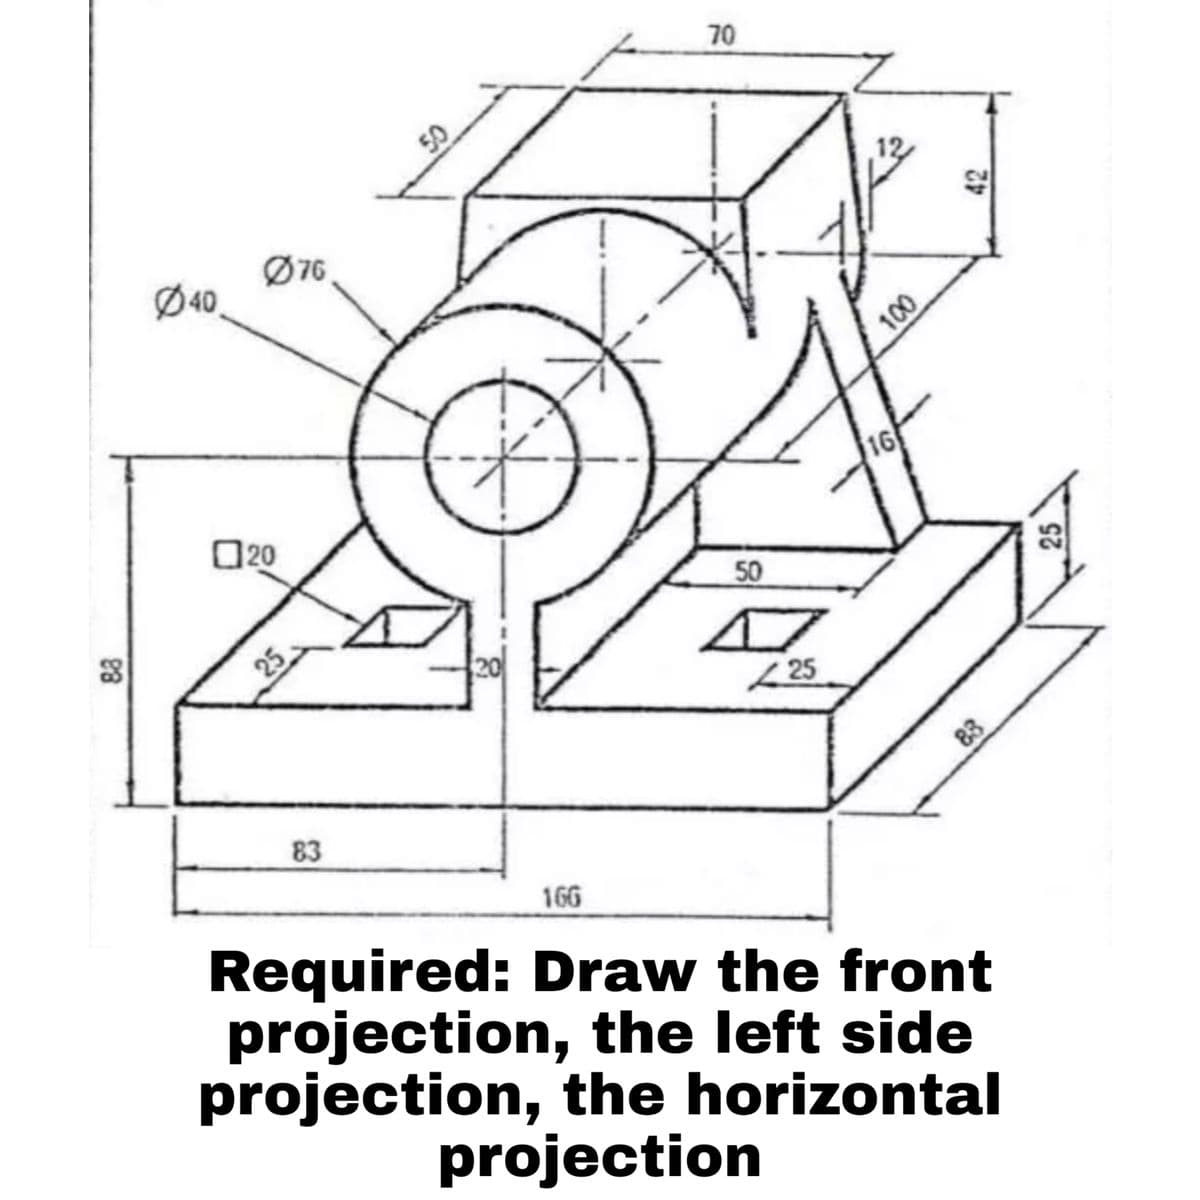 70
Ø76,
Ø40,
16
O20
50
25
83
166
Required: Draw the front
projection, the left side
projection, the horizontal
projection
000
83
88
